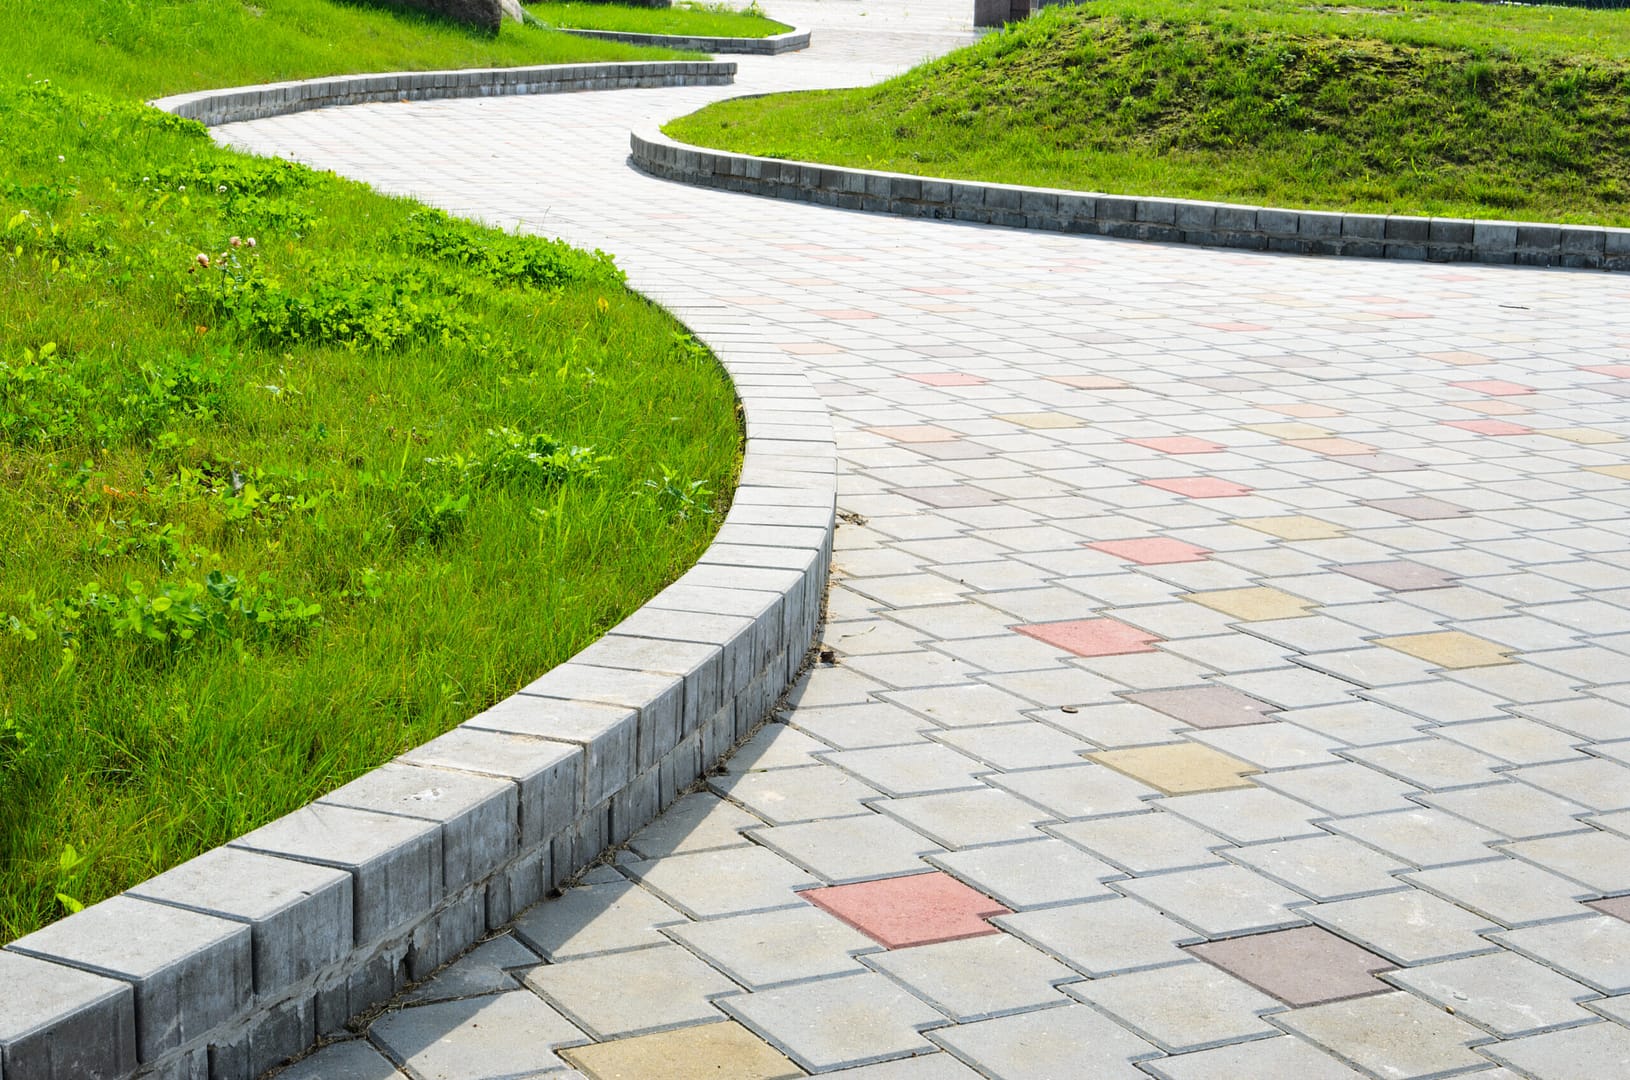 Curved garden path featuring a variety of multicolored sidewalk tiles creating a vibrant and visually appealing walkway through the lush greenery.